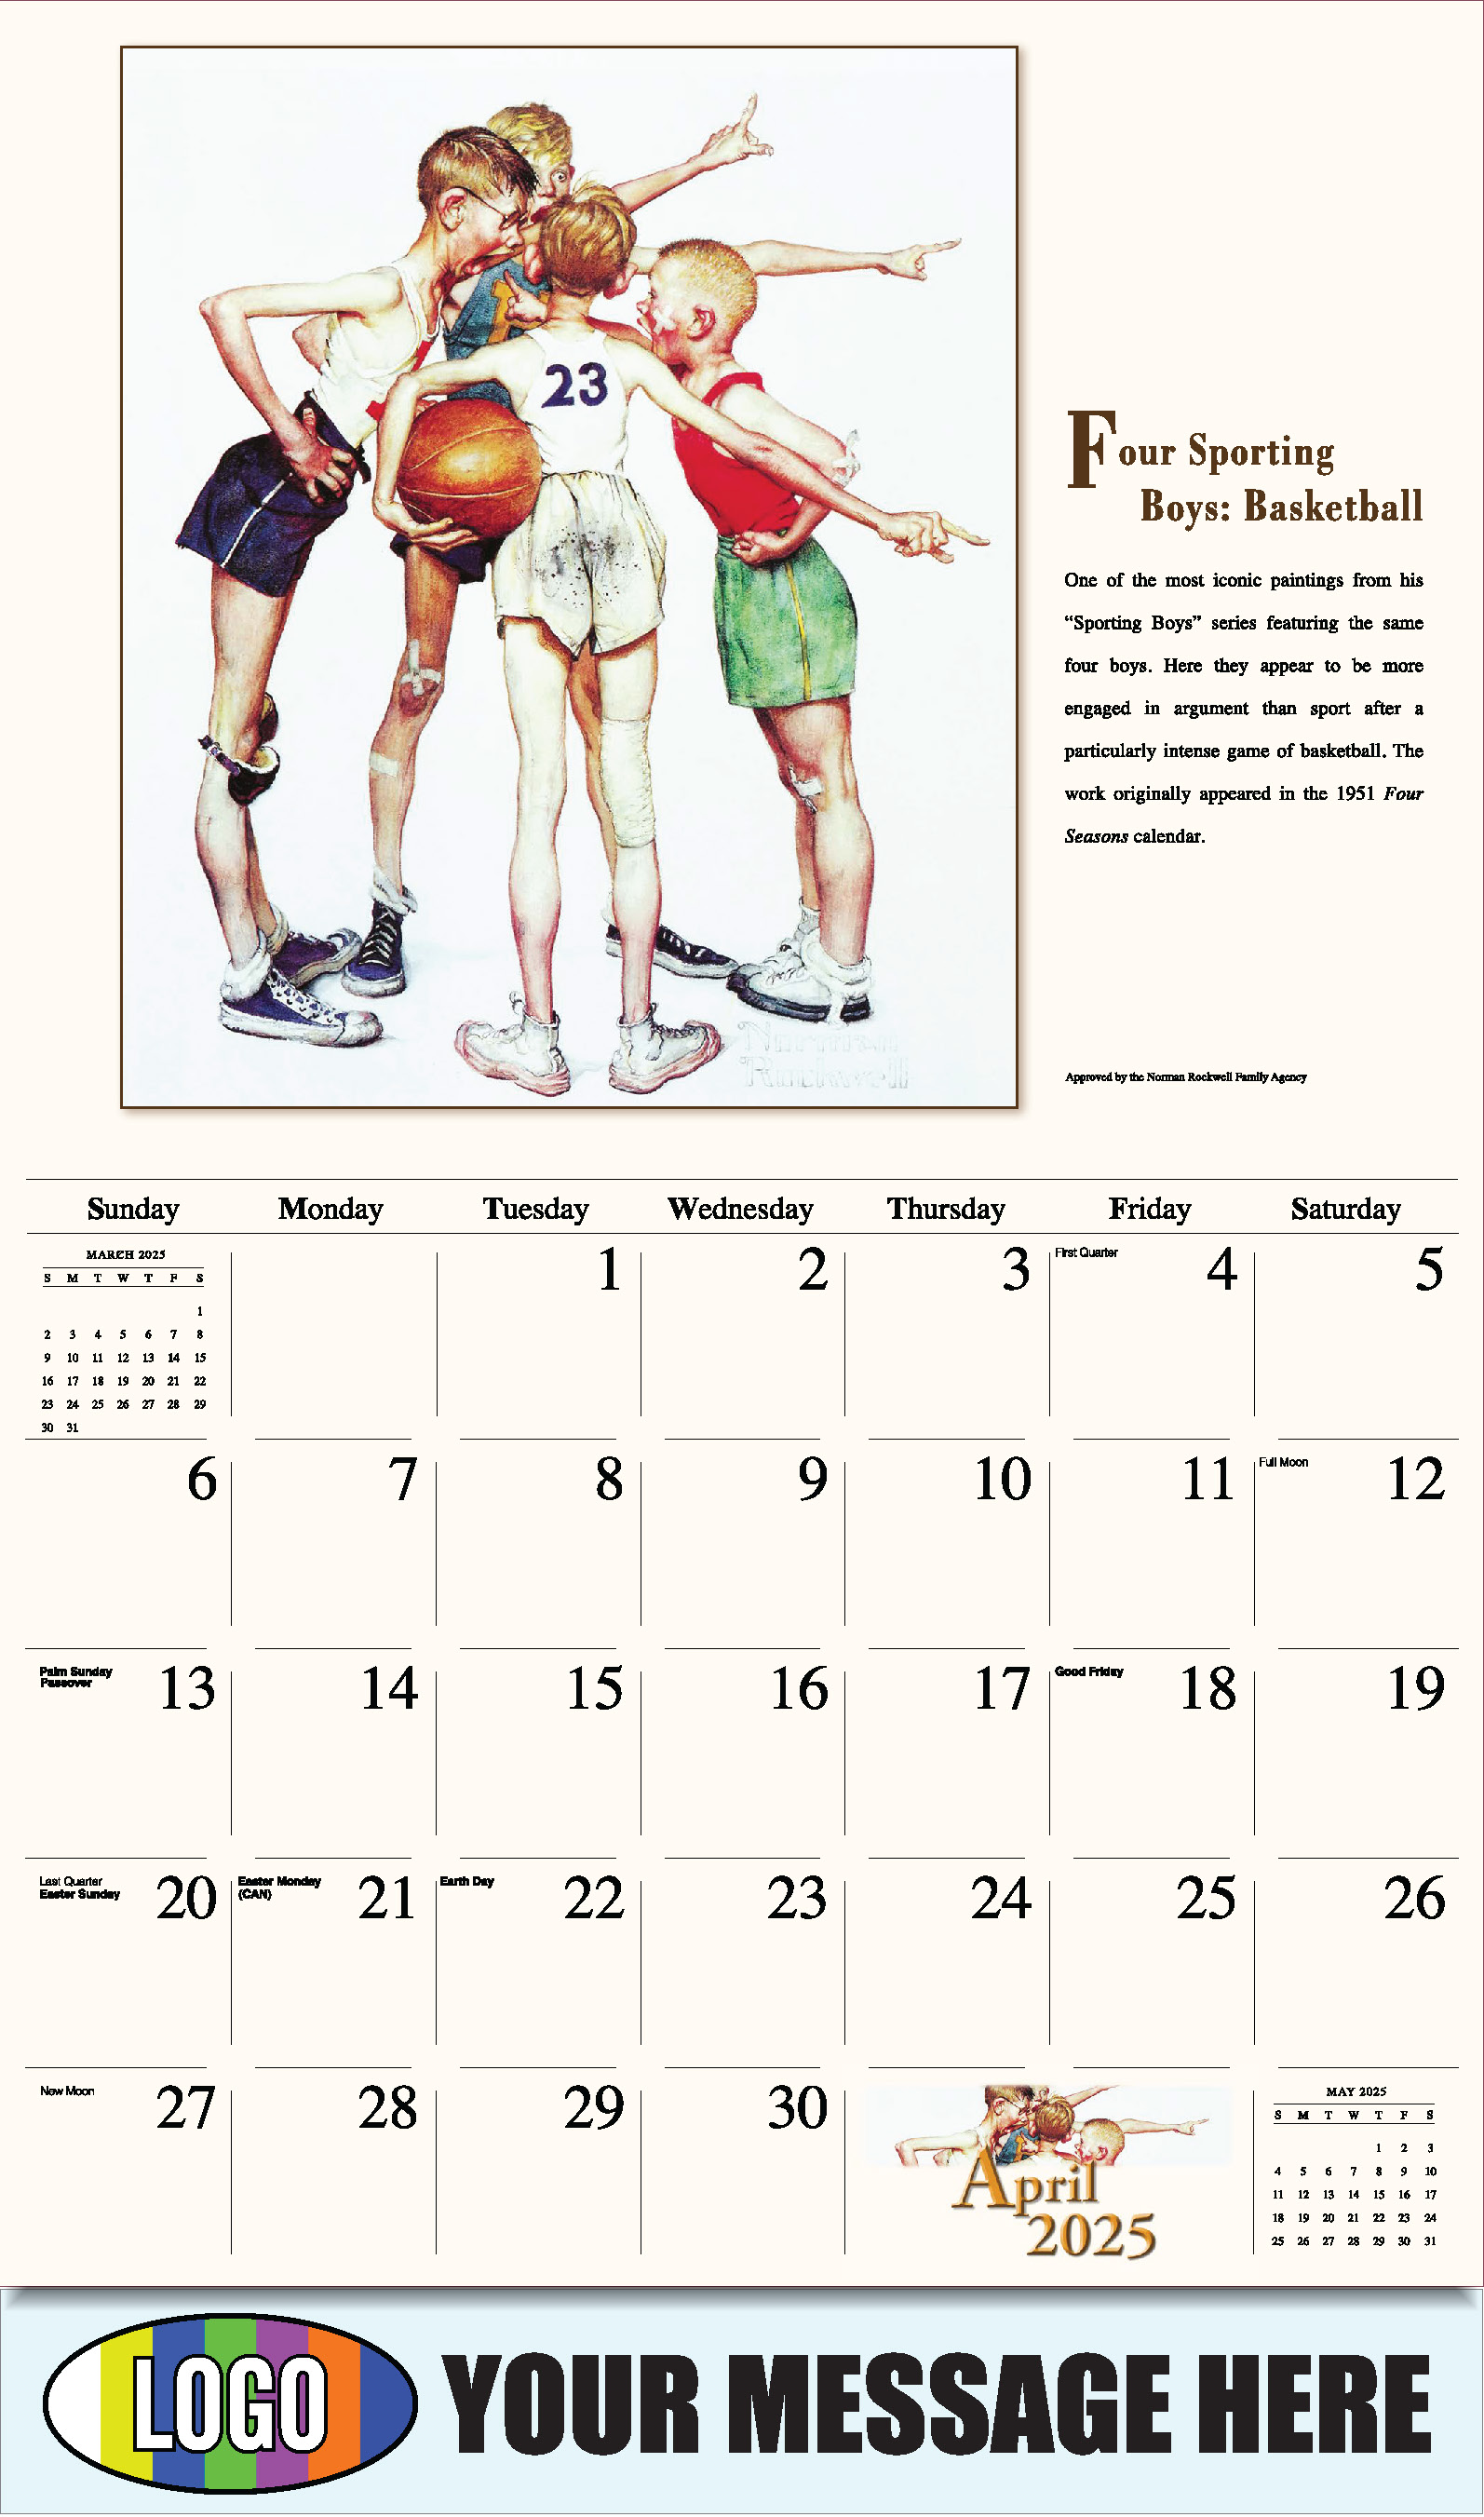 Memorable Images by Norman Rockwell 2025 Business Promotional Wall Calendar - April